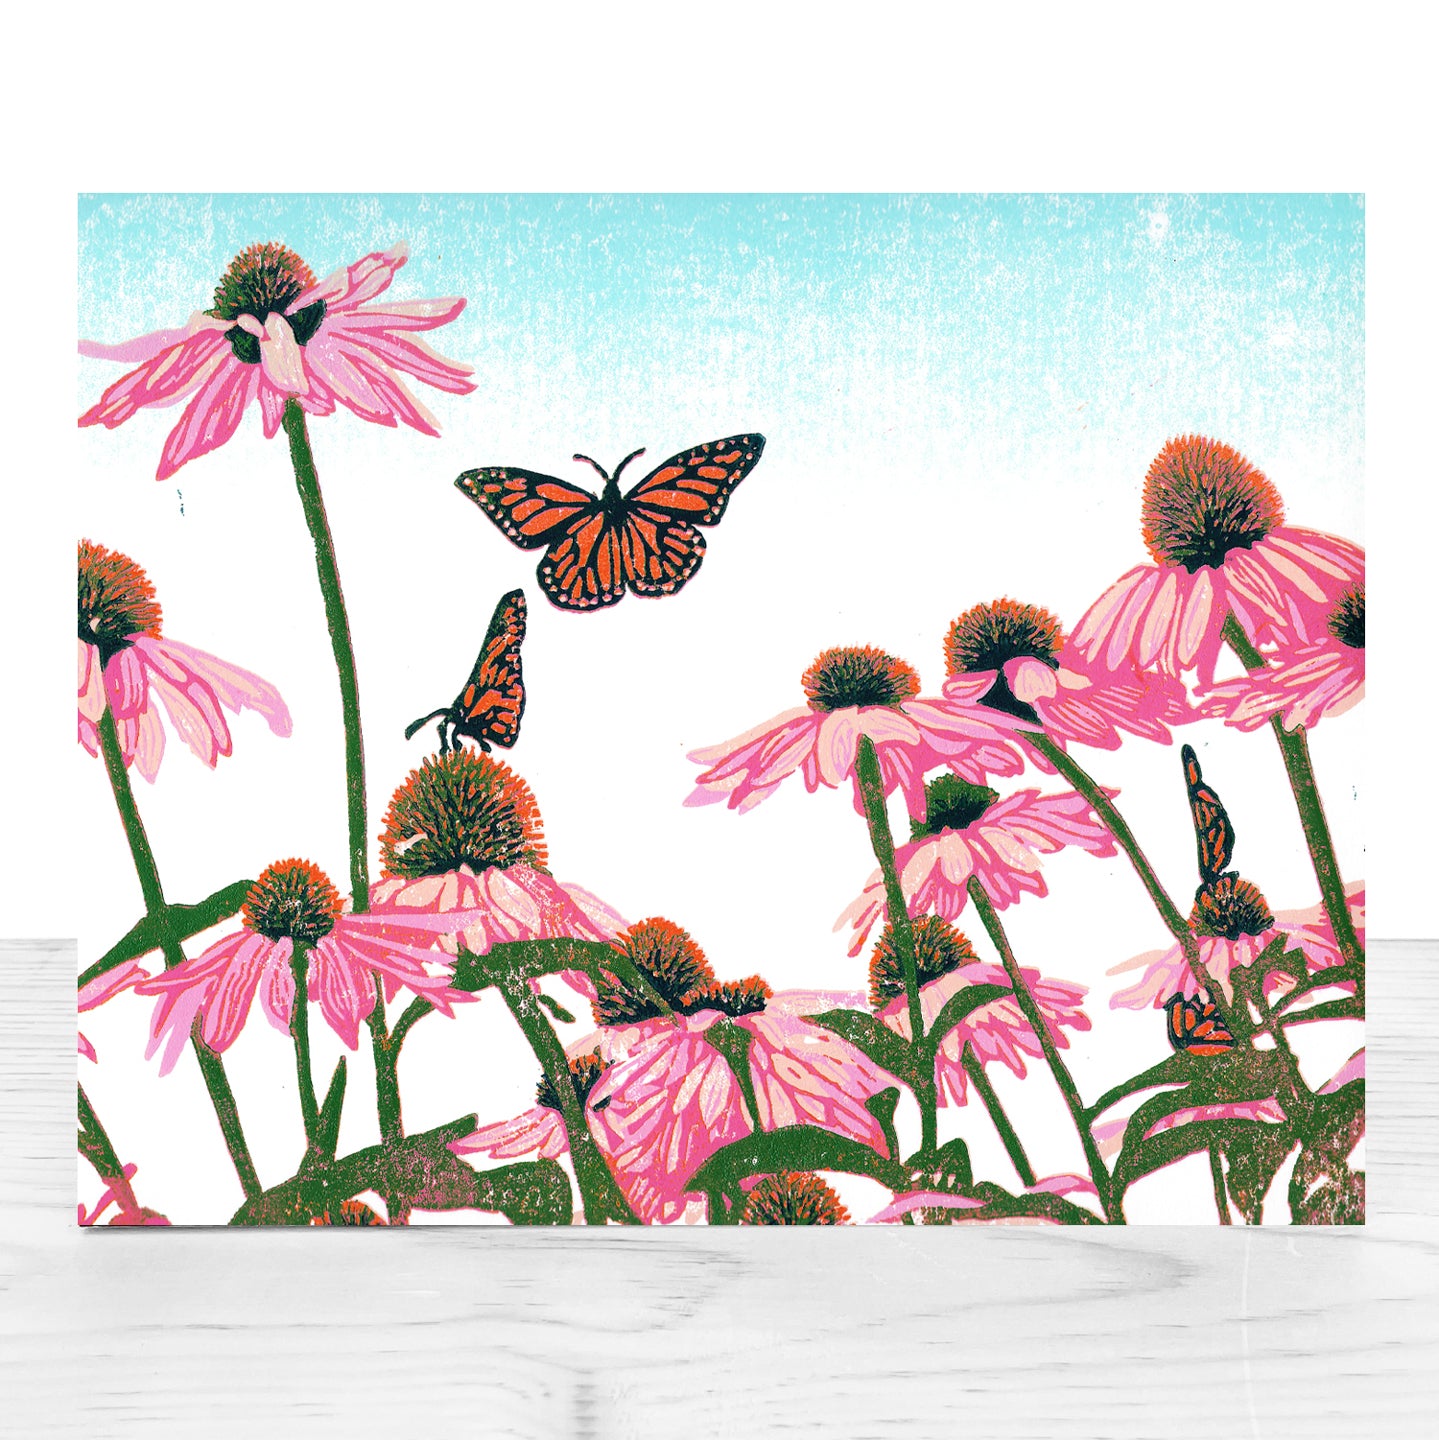 Contemporary floral art by Natalia Wohletz of Peninsula Prints titled Coneflower Patch.